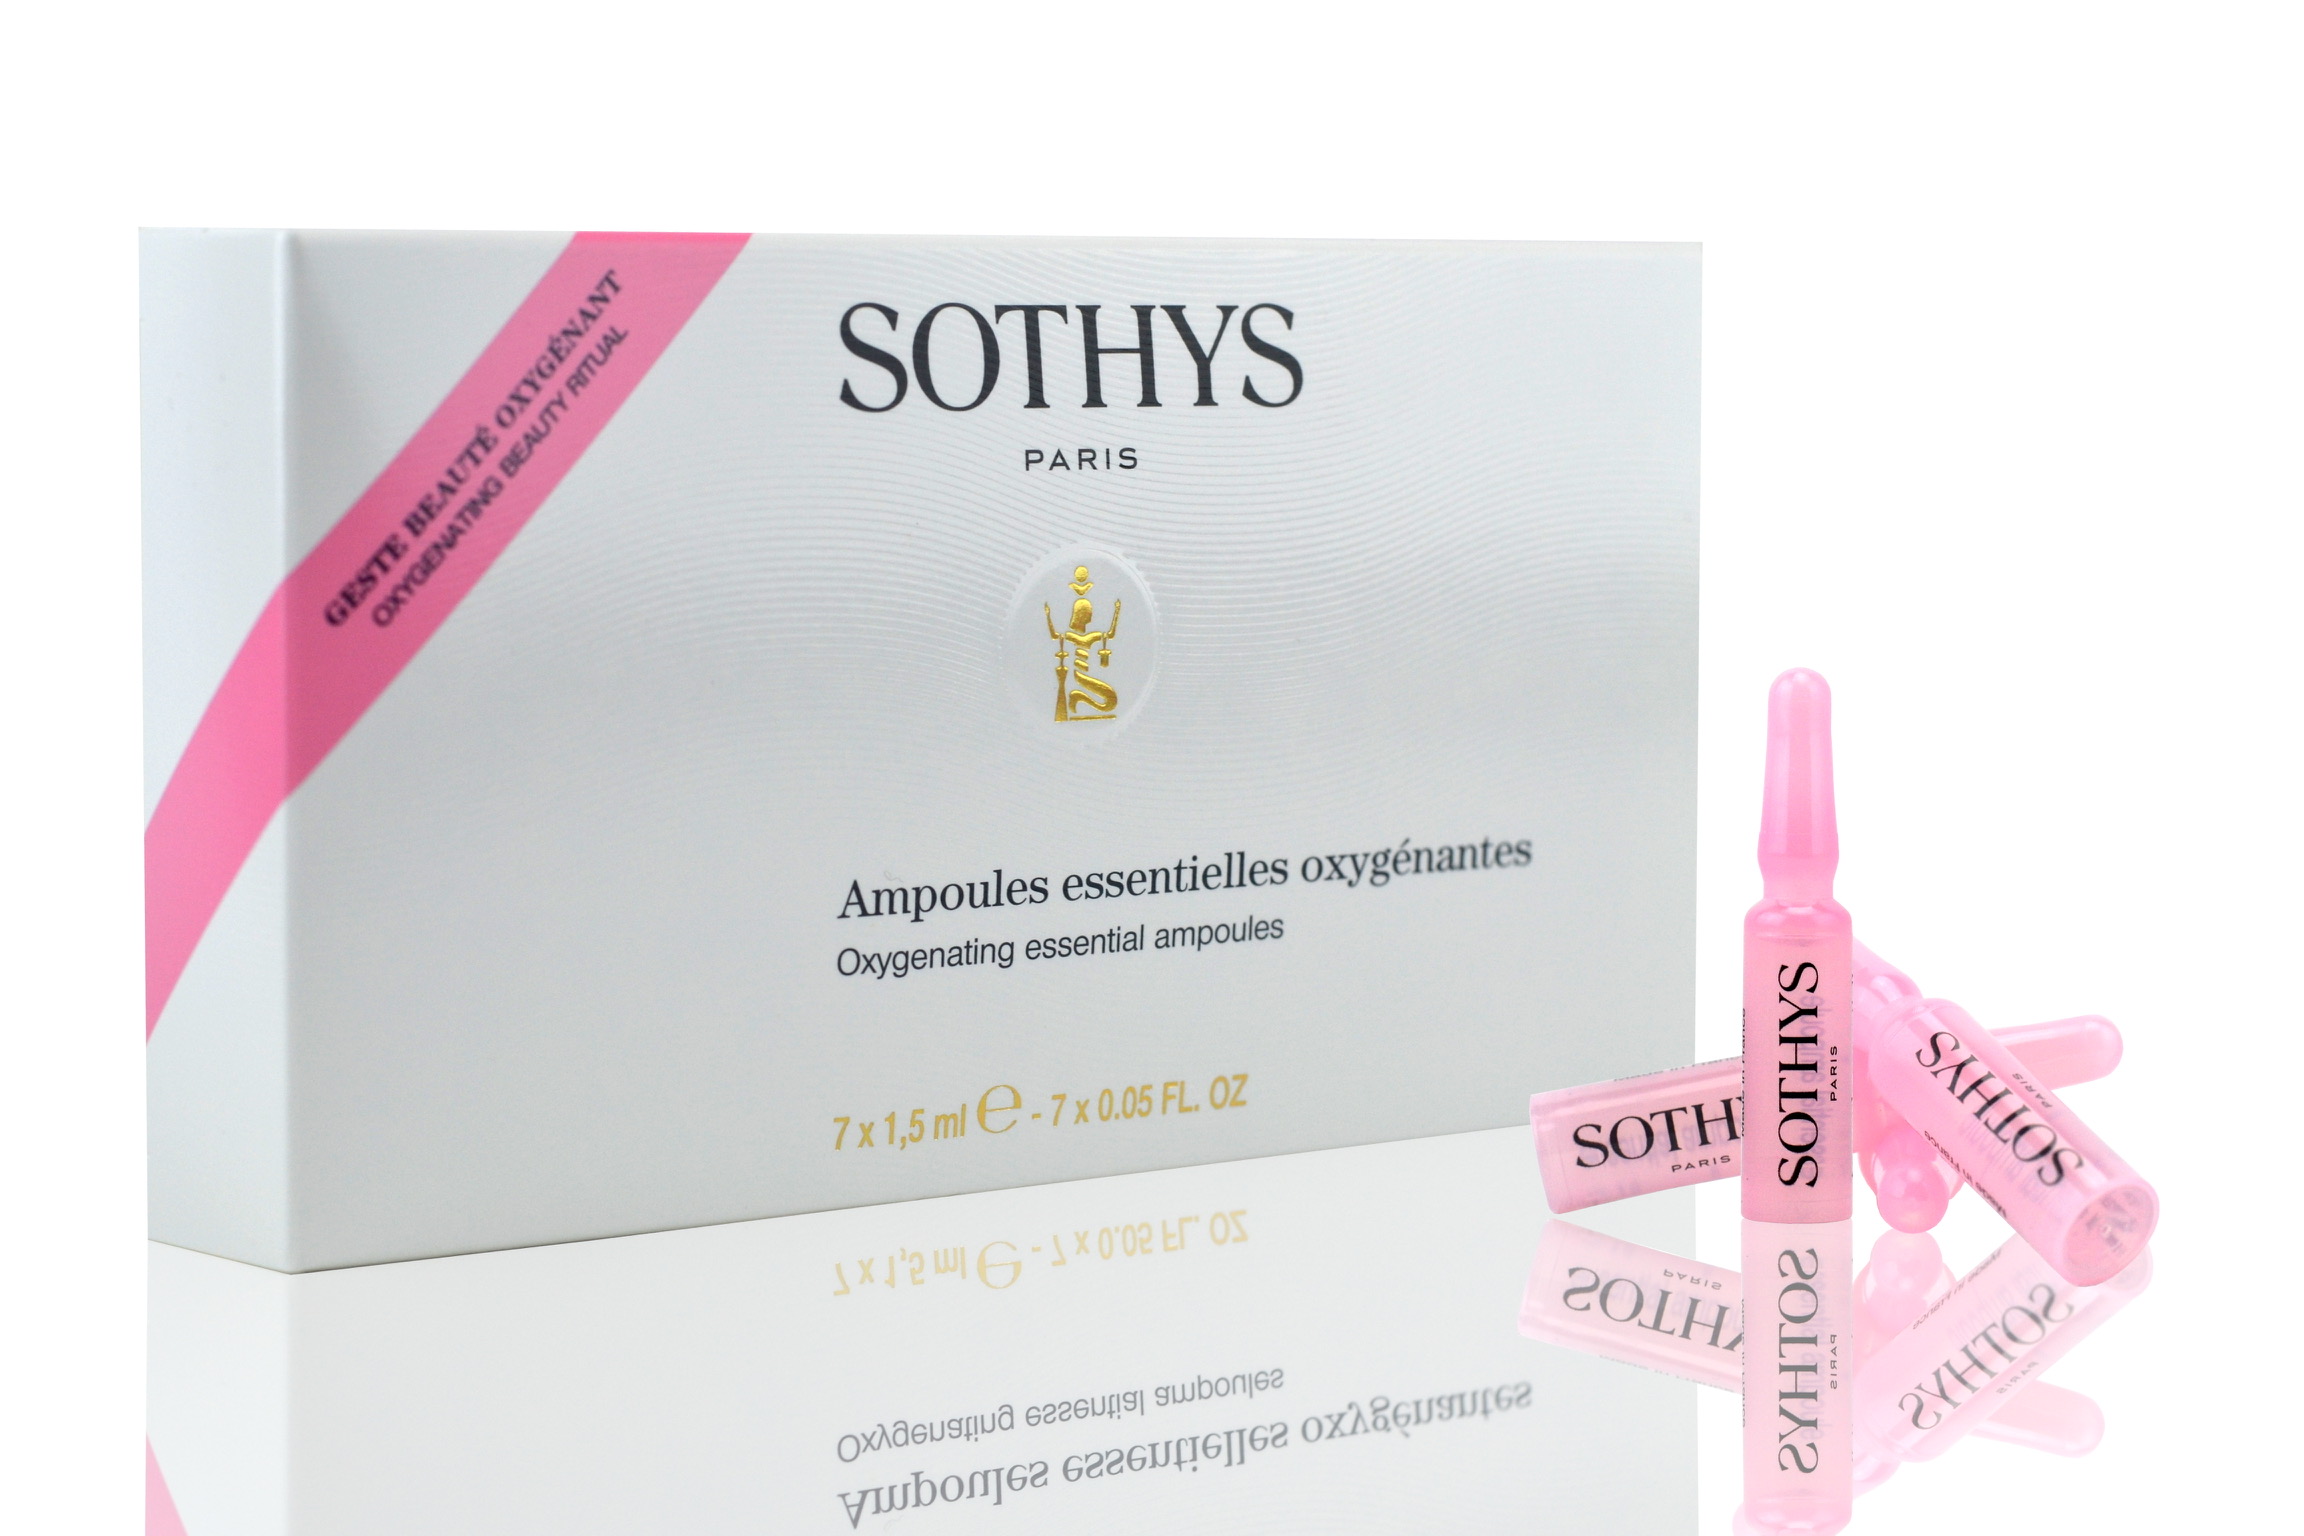 Oxygenating Essential Ampoules by Sothys